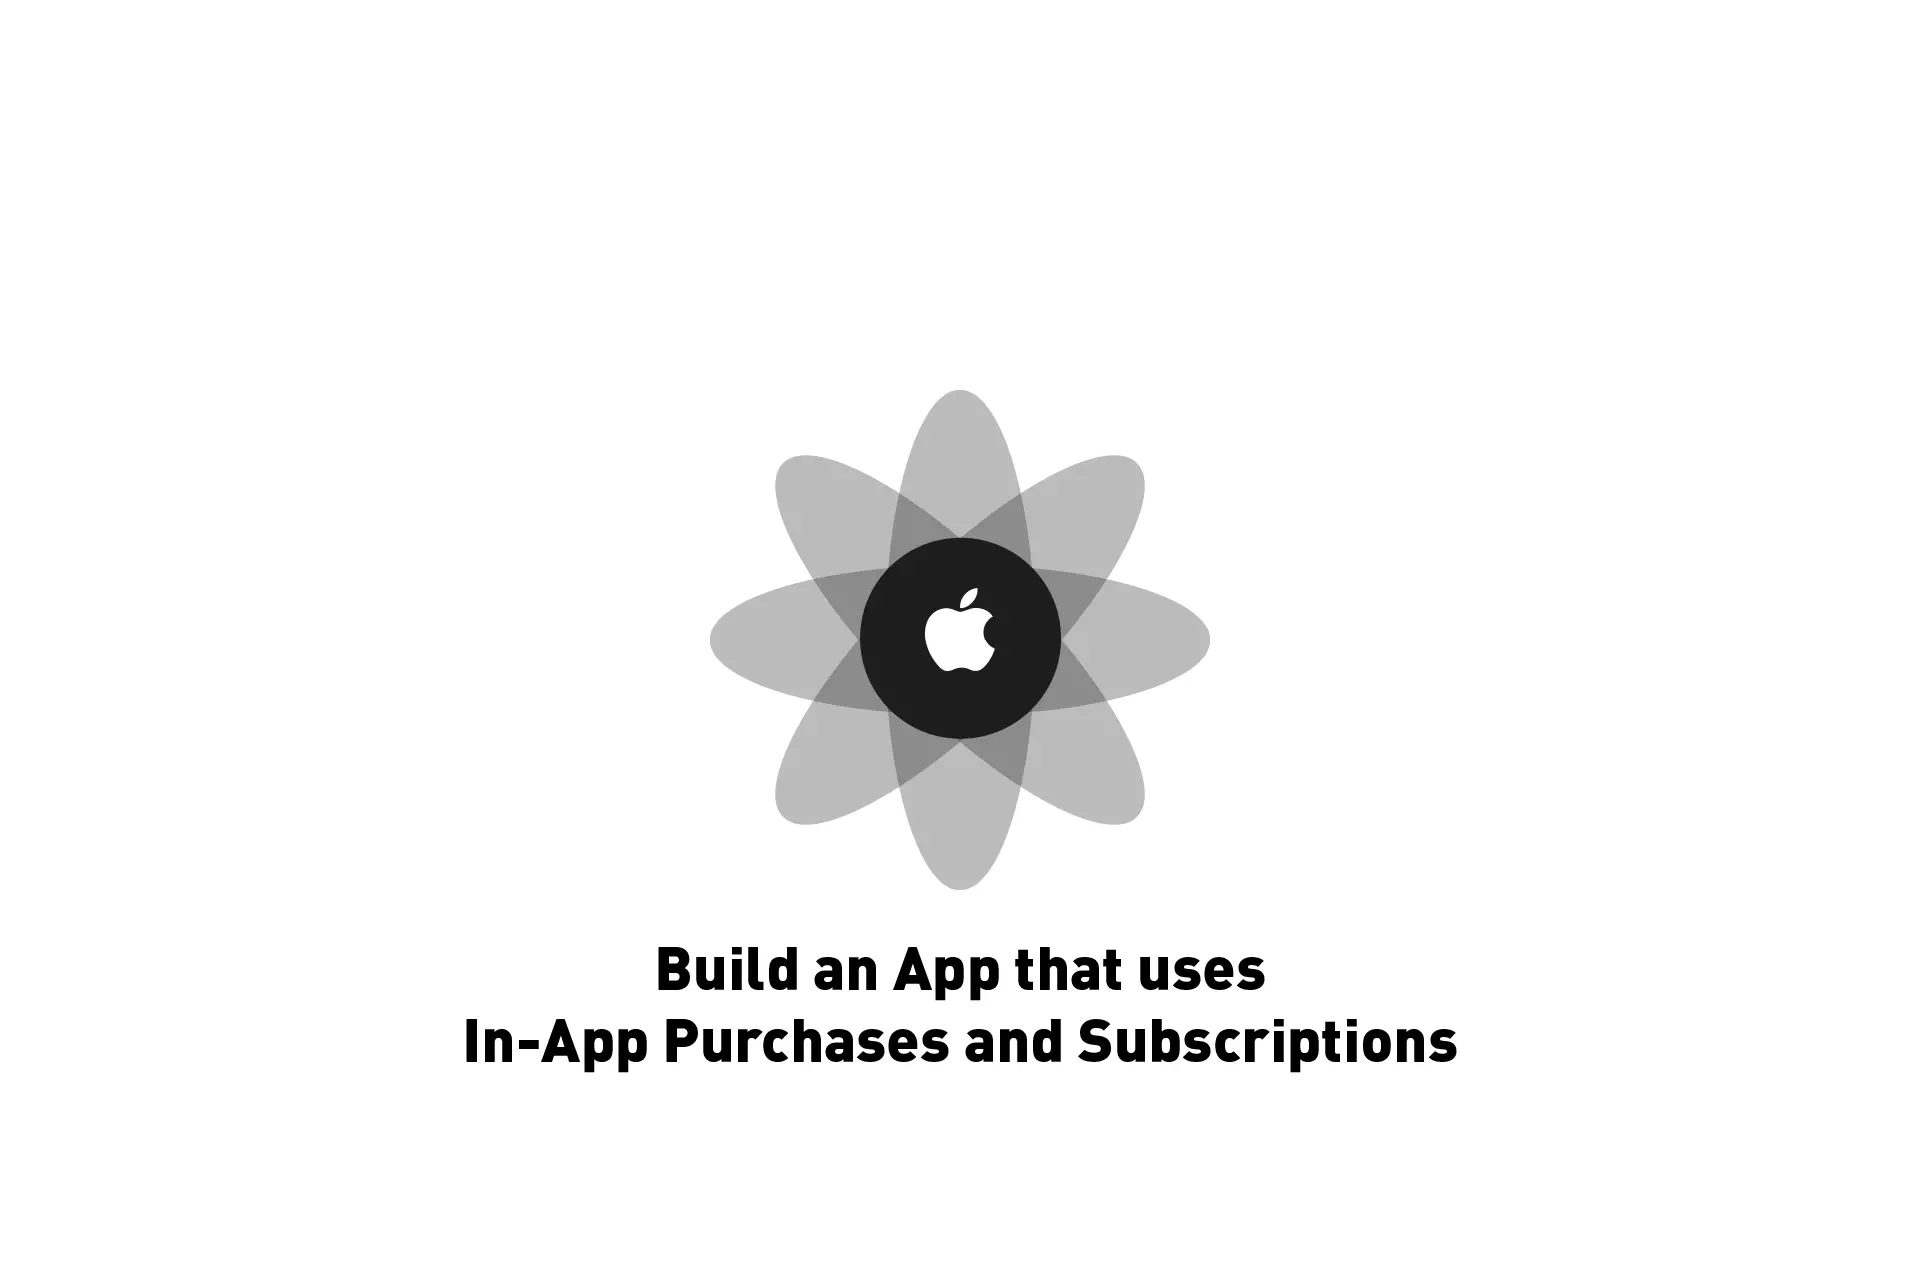 A flower that represents Apple with the text "Build an App that uses In-App Purchases and Subscriptions."